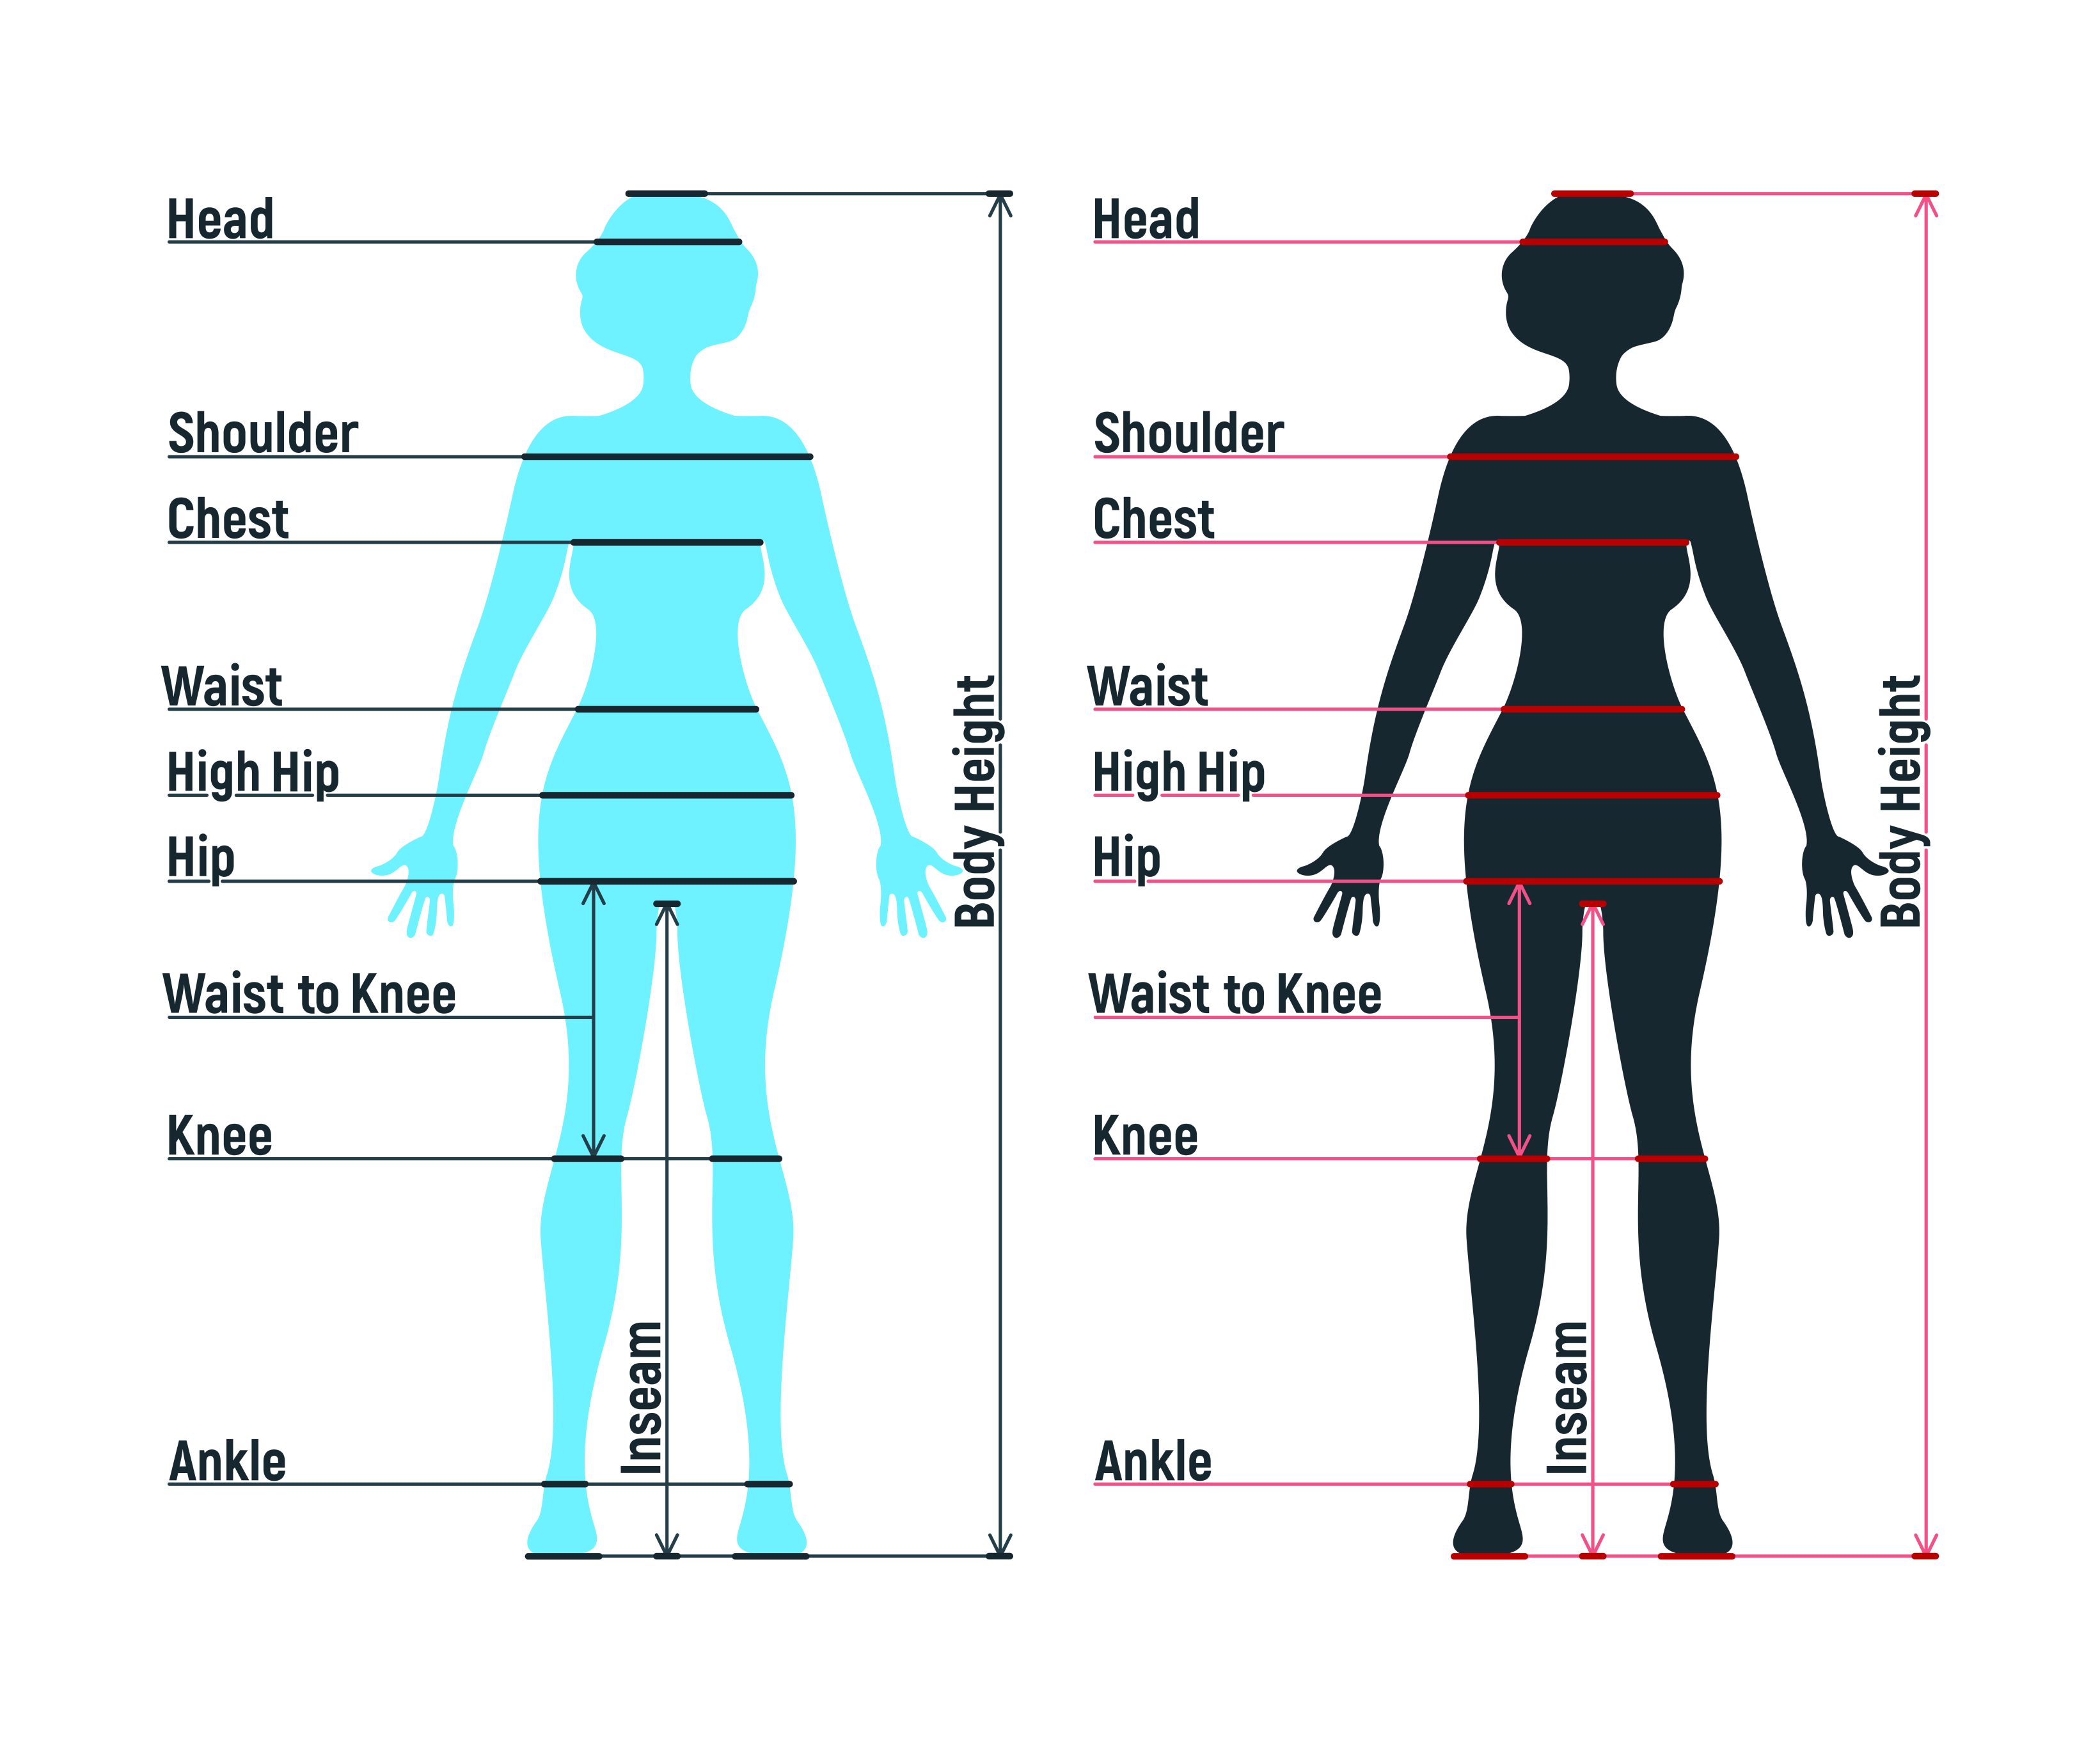 Body measurements. Ten body measurements for the cloth-skin